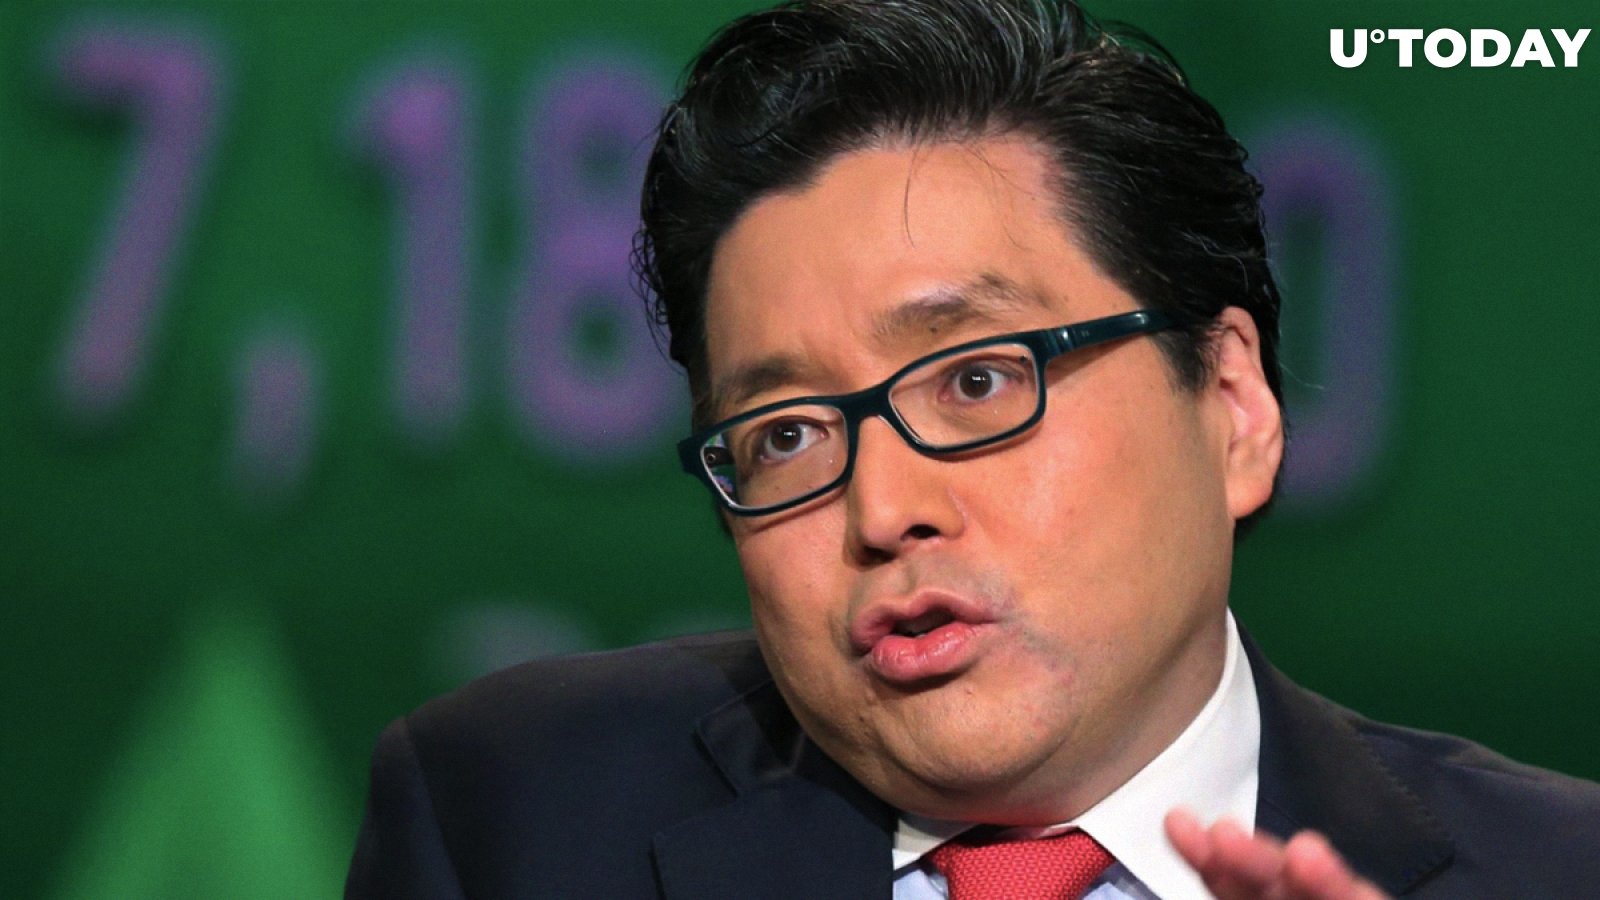 Fundstrat's Tom Lee in Hot Water for Speaking at Anti-Bitcoin Conference